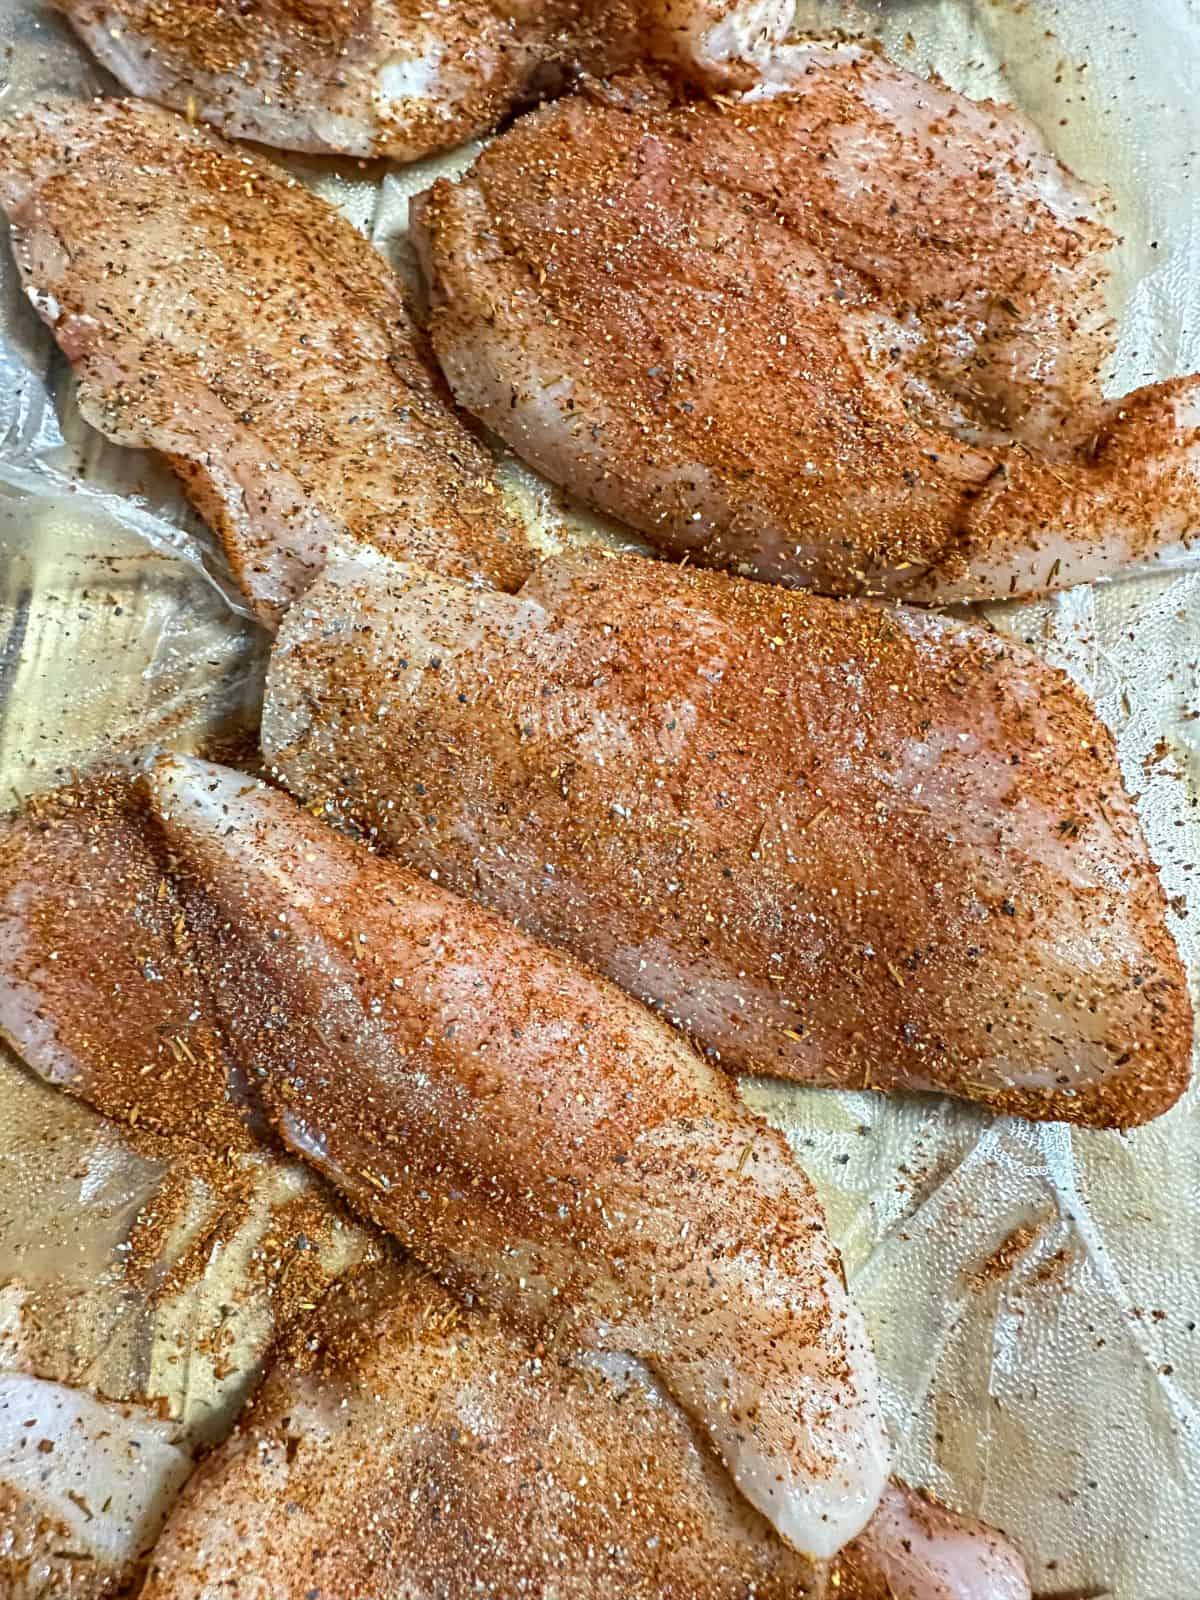 Raw chicken breasts liberally seasoned with Cajun spices, prepped for browning in the Southern Smothered Chicken recipe.